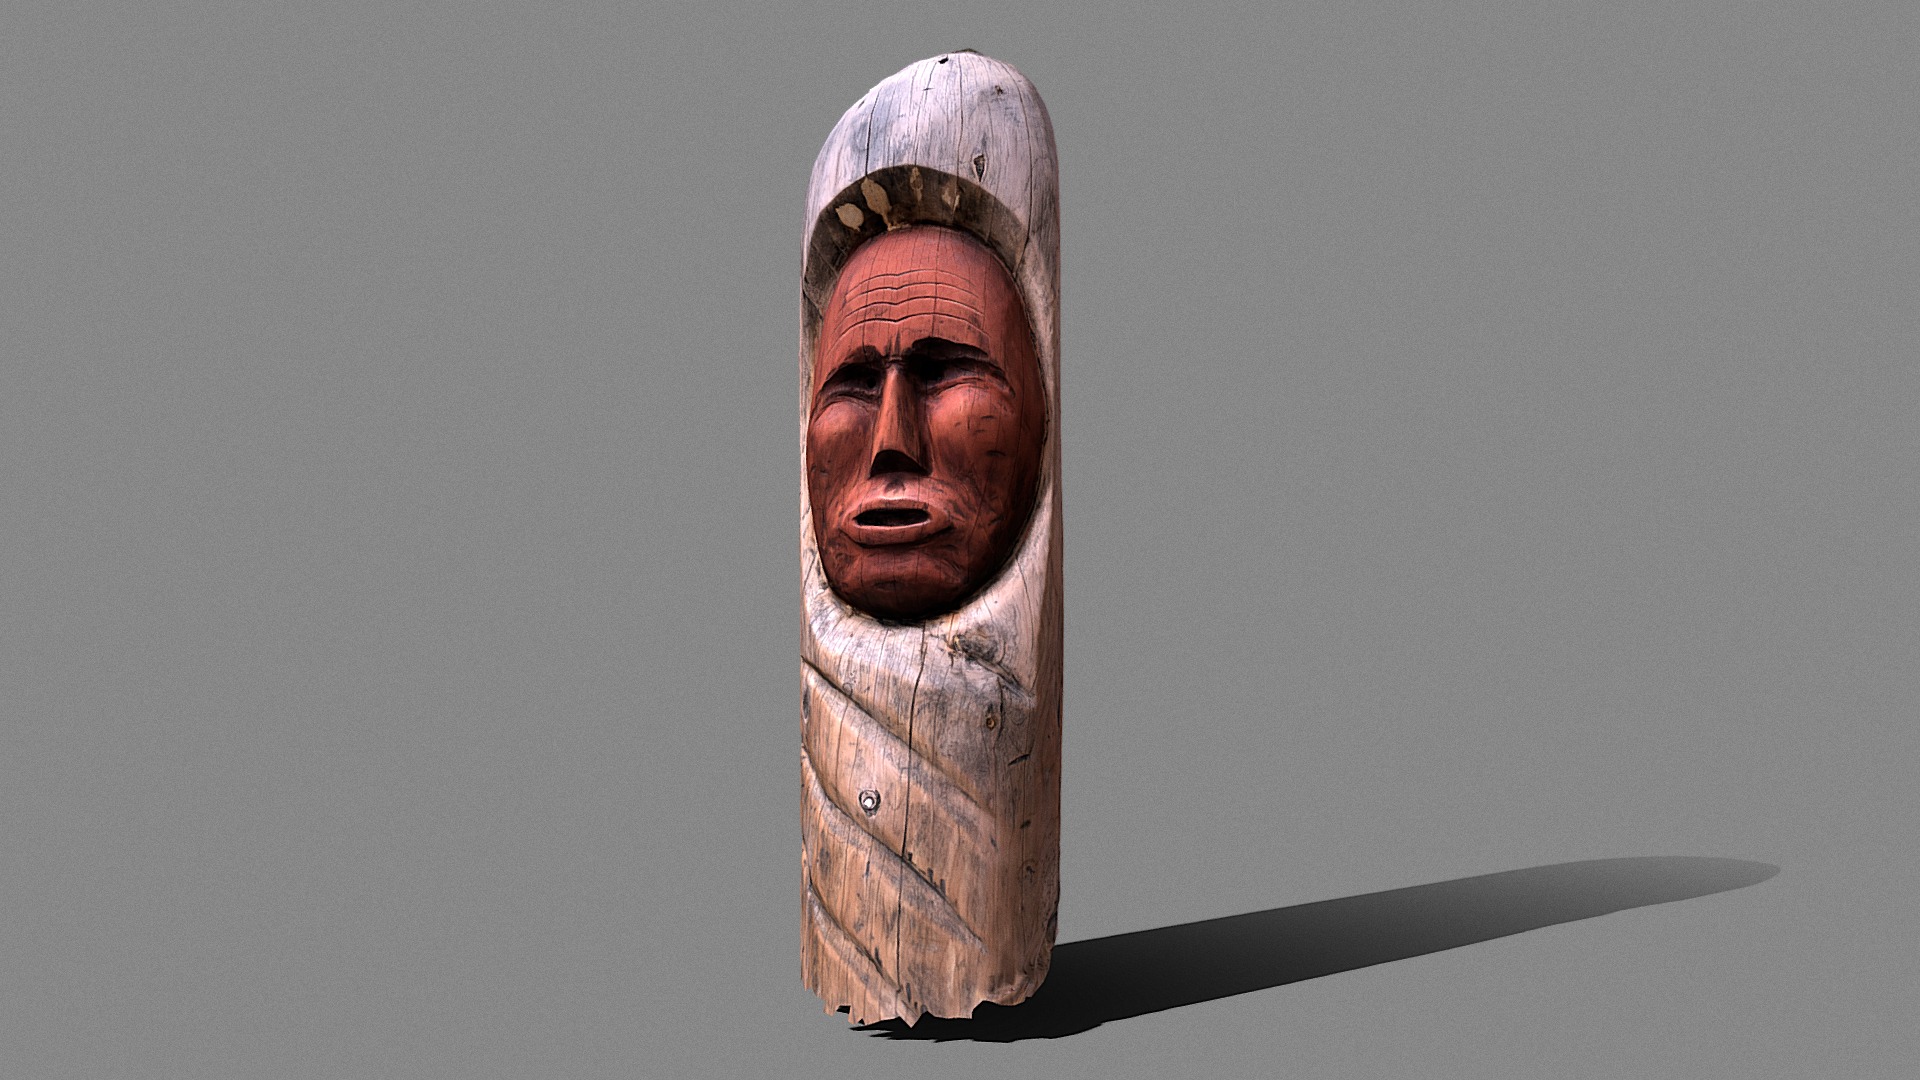 3D model Totem pole scan from Powhatan Indian Village - This is a 3D model of the Totem pole scan from Powhatan Indian Village. The 3D model is about a wood carving of a man.